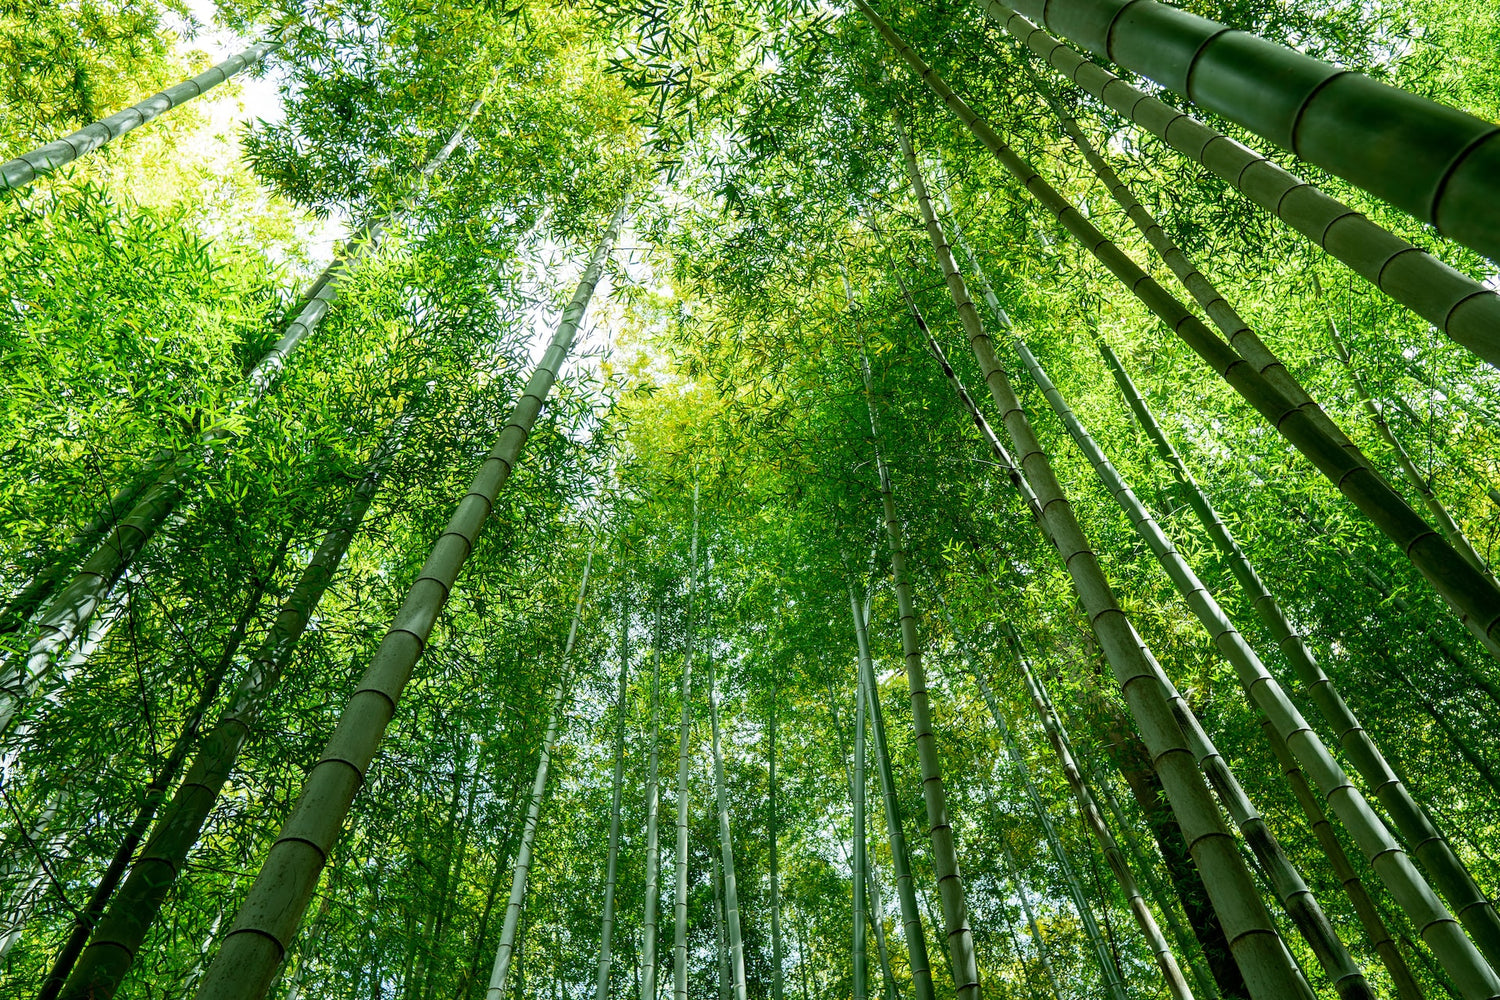 Looking up in a bamboo forest.